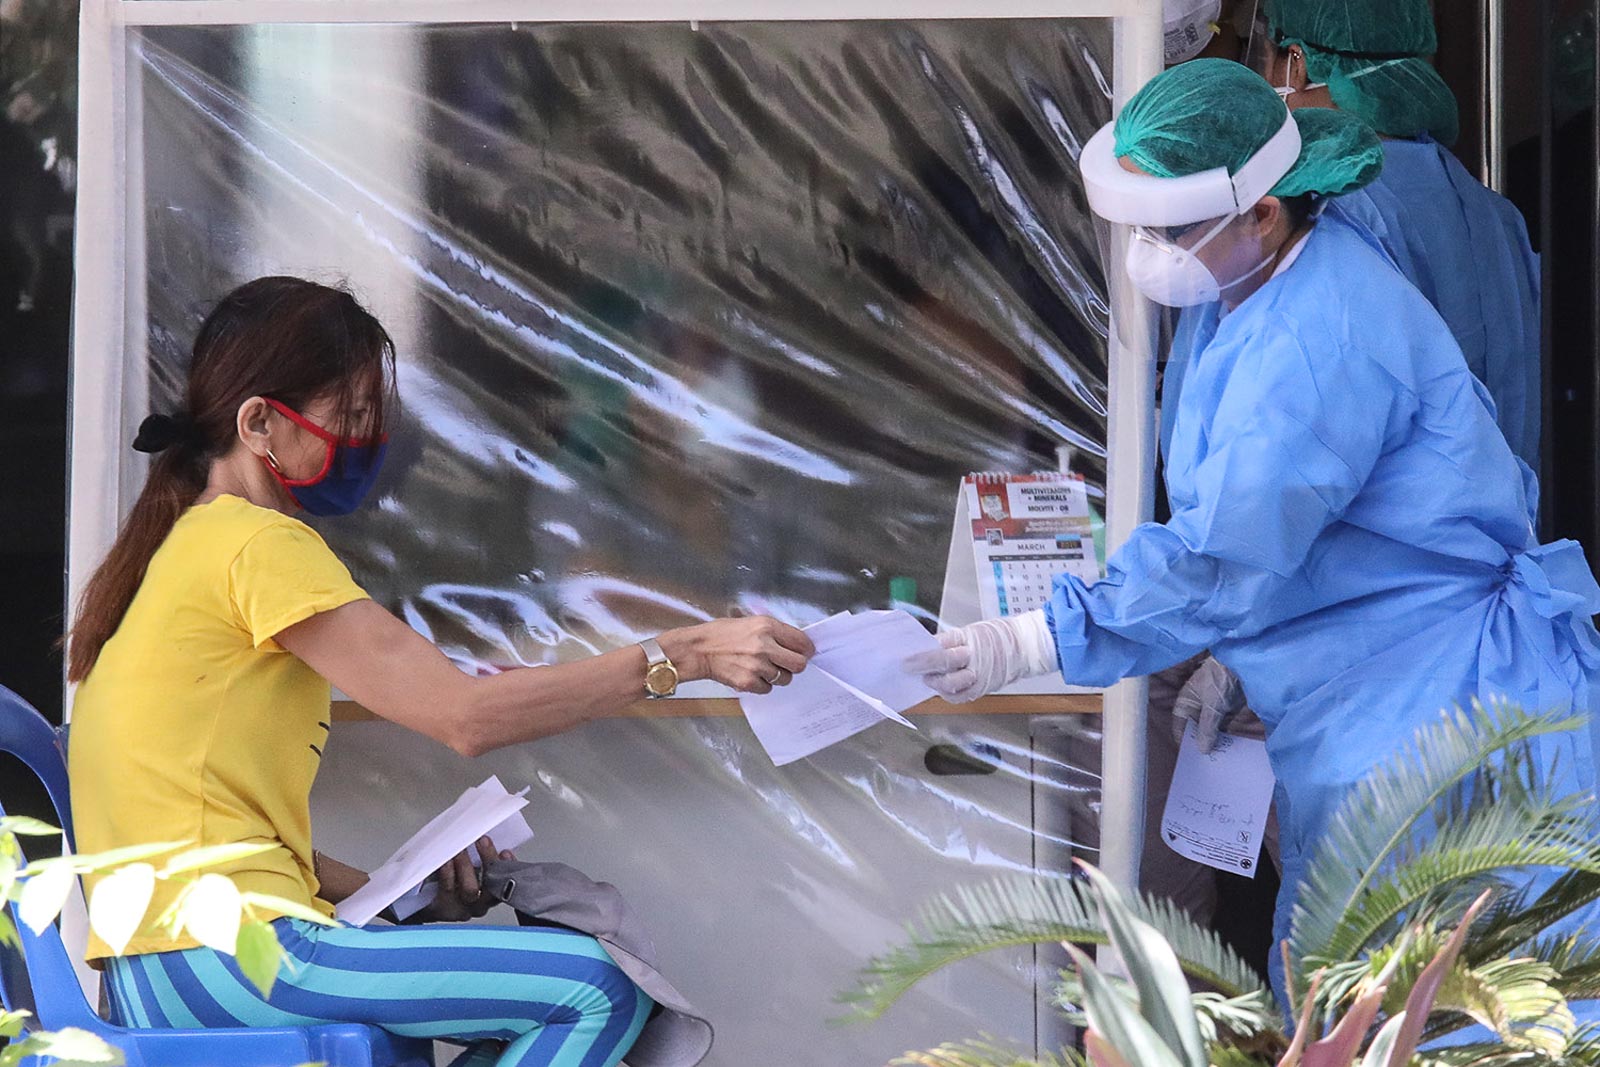 PROTECTION. The Rosario Maclang Bautista General Hospital on March 30, installs plastic dividers to separate health workers from patients as a precautionary measure to contain the spread of the coronavirus. Photo by Darren Langit/Rappler  